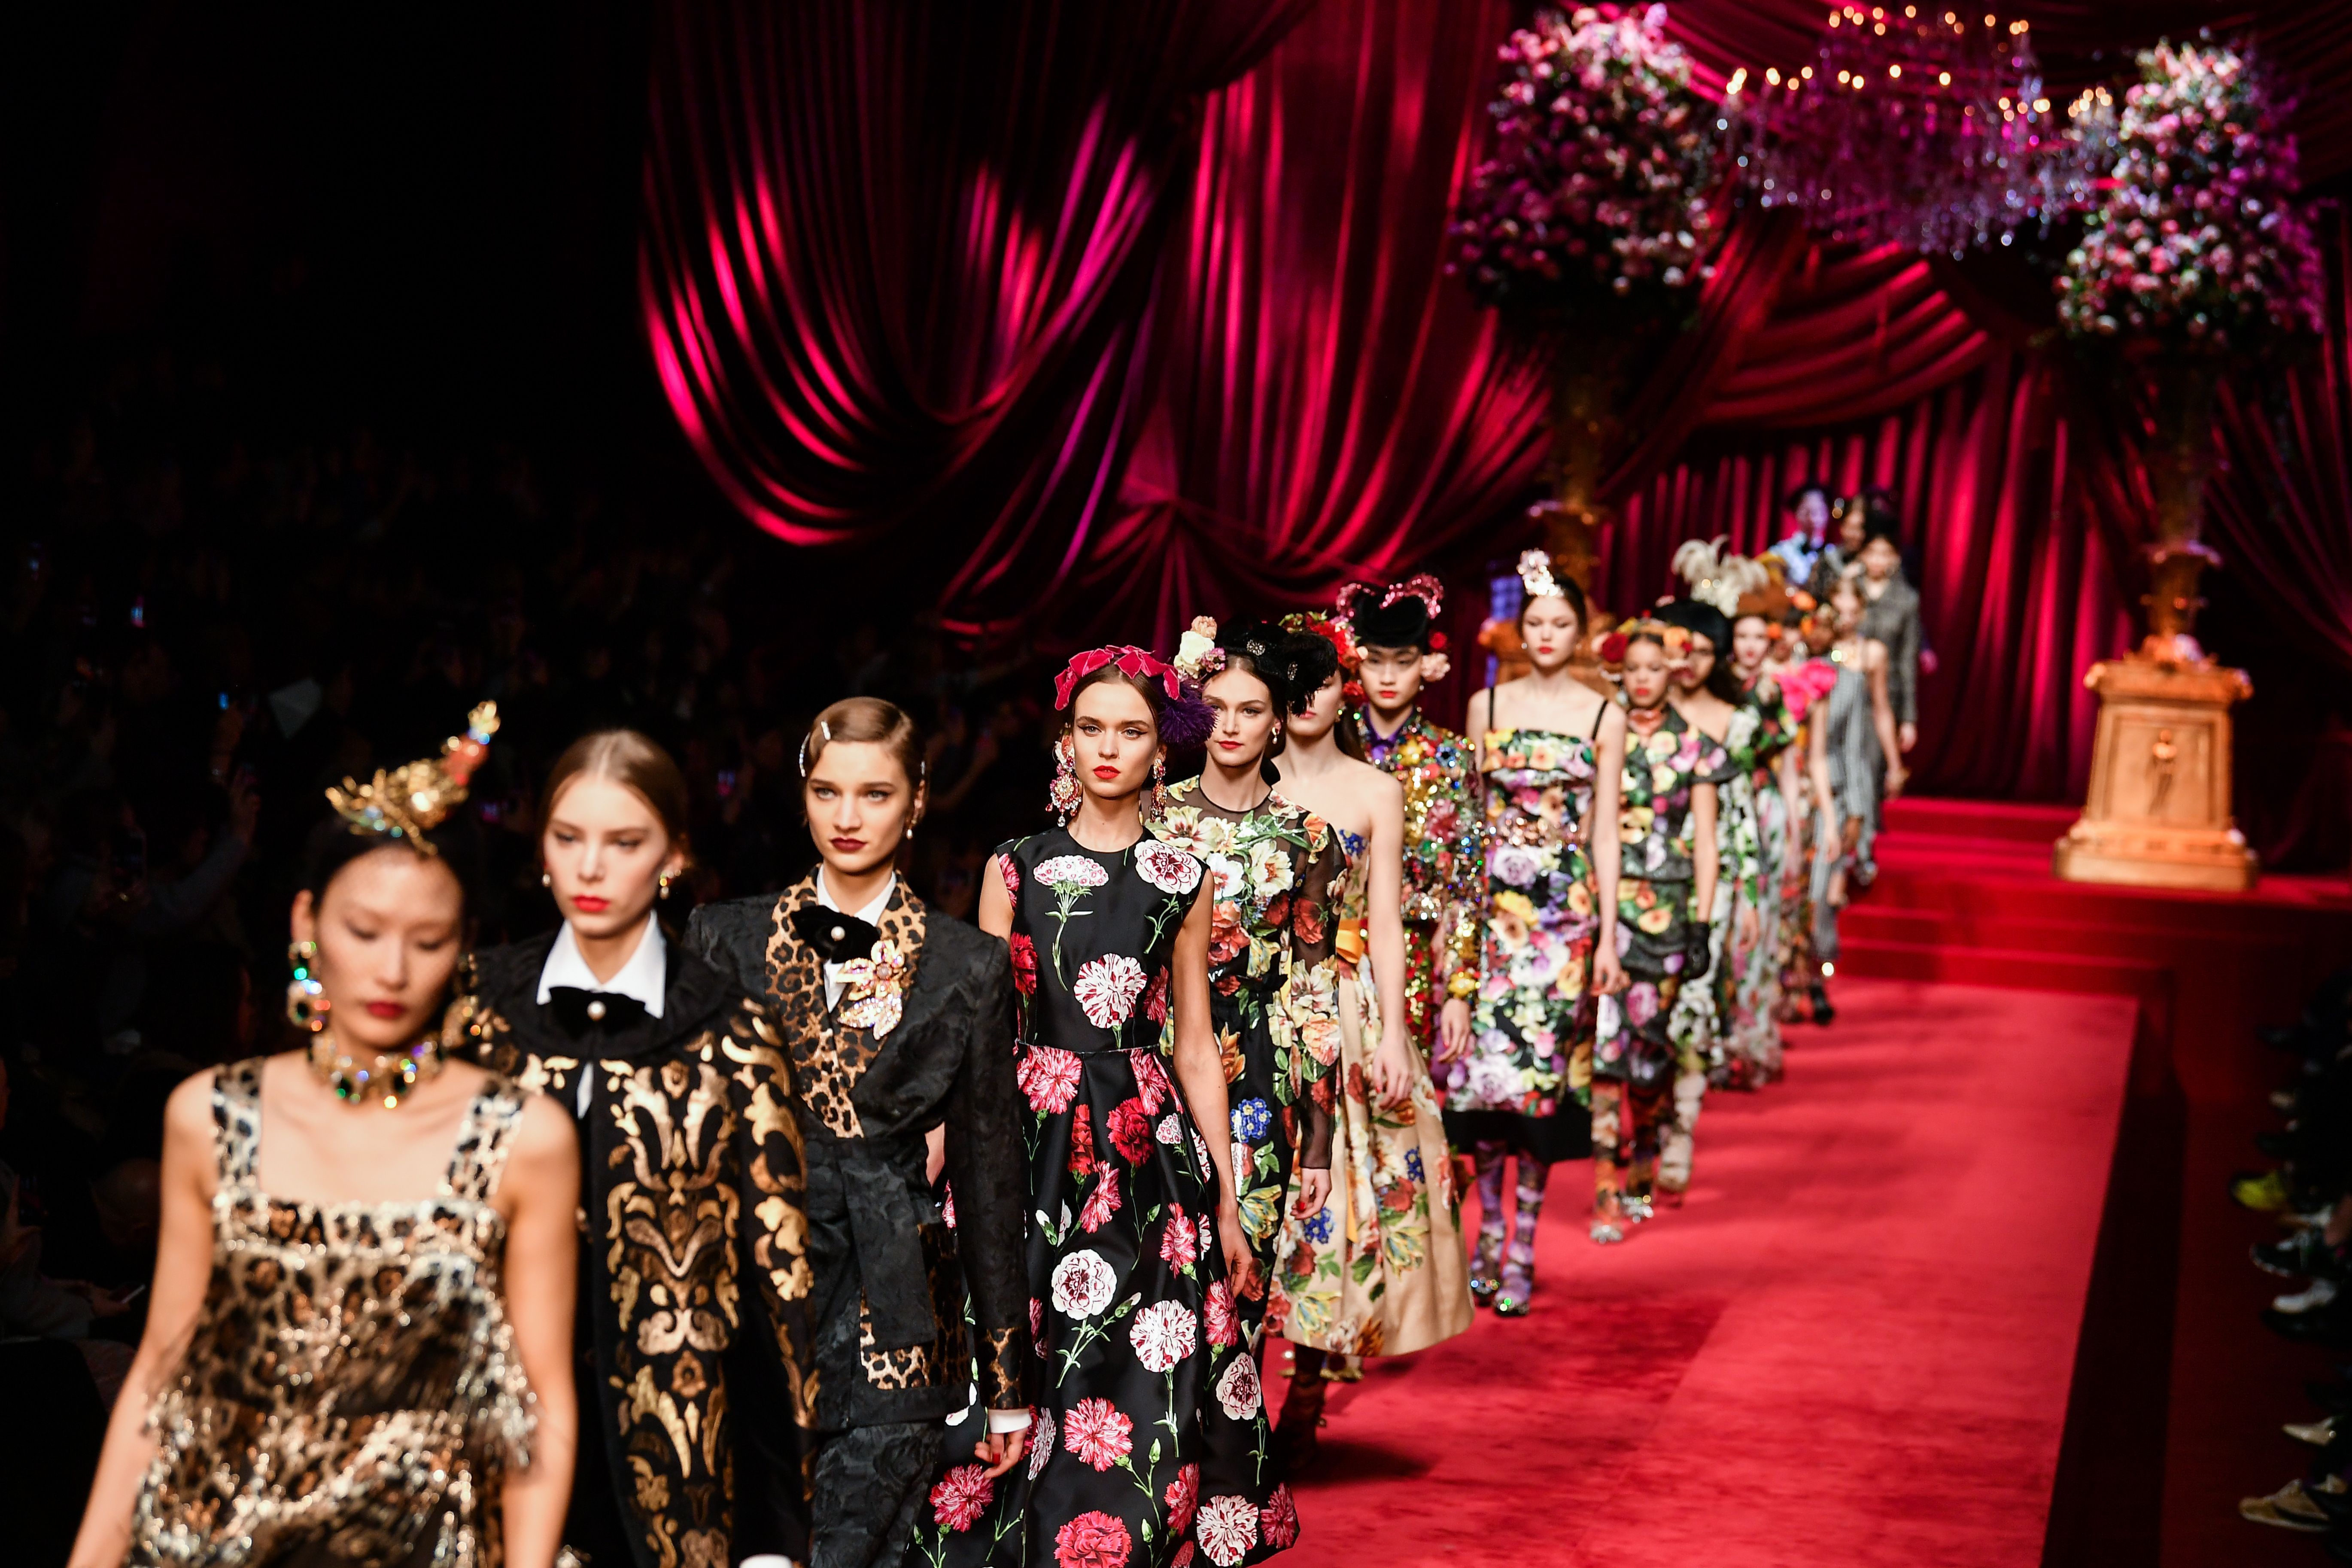 Dolce & Gabbana teams up with university to support coronavirus